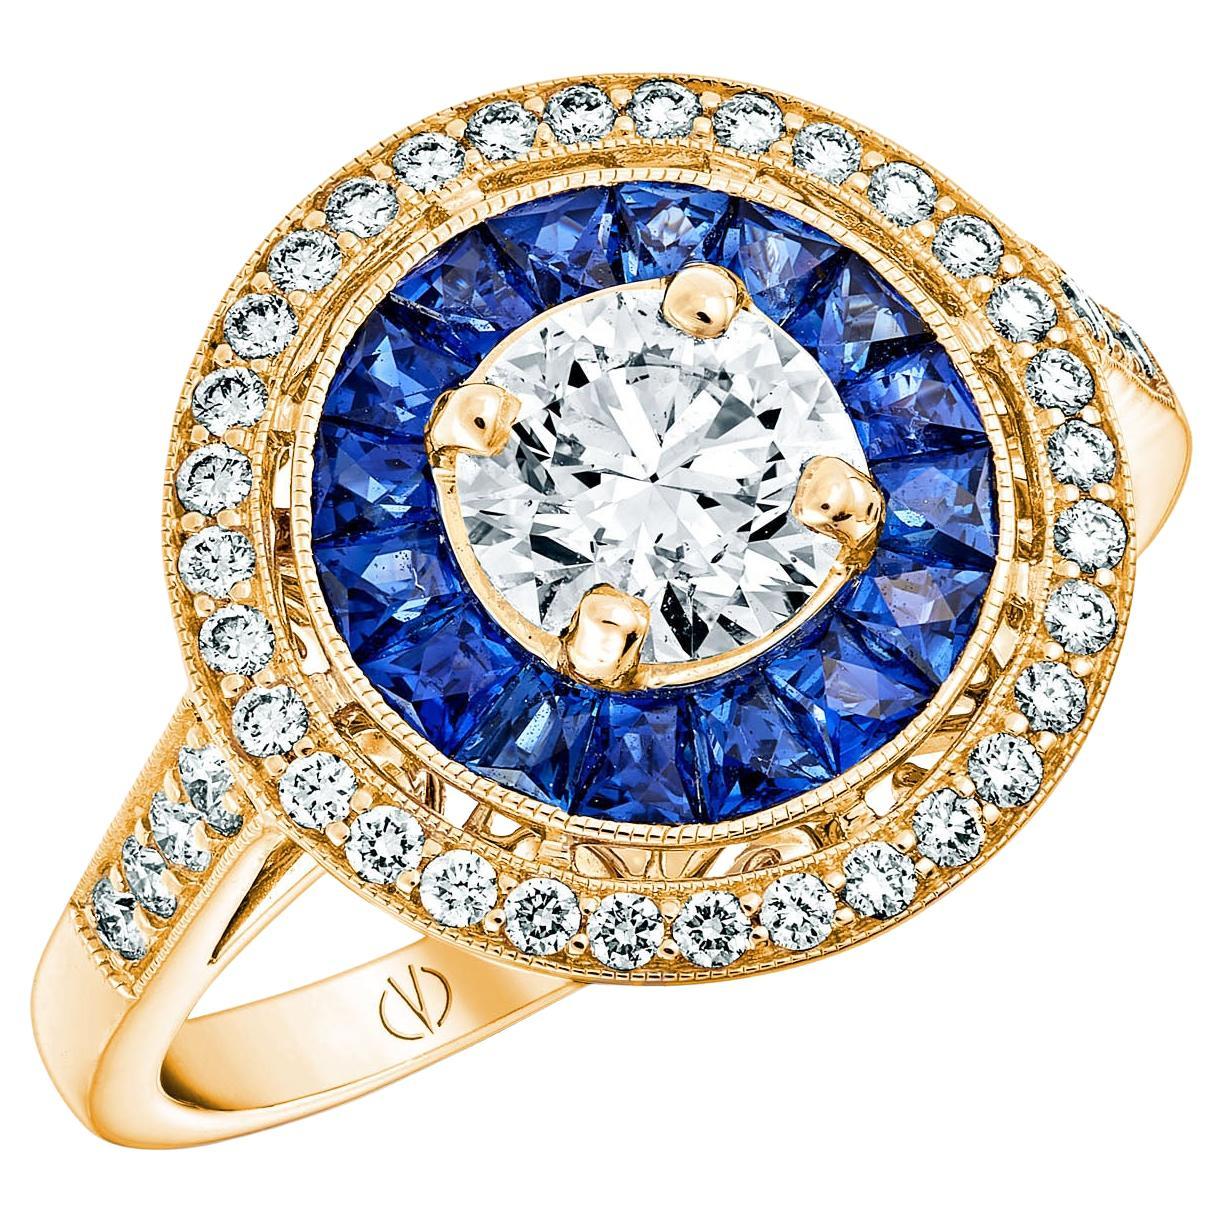 For Sale:  Art Deco Style 18k Yellow Gold Calibre Cut Sapphire Ring With 0.75 Ct Diamond